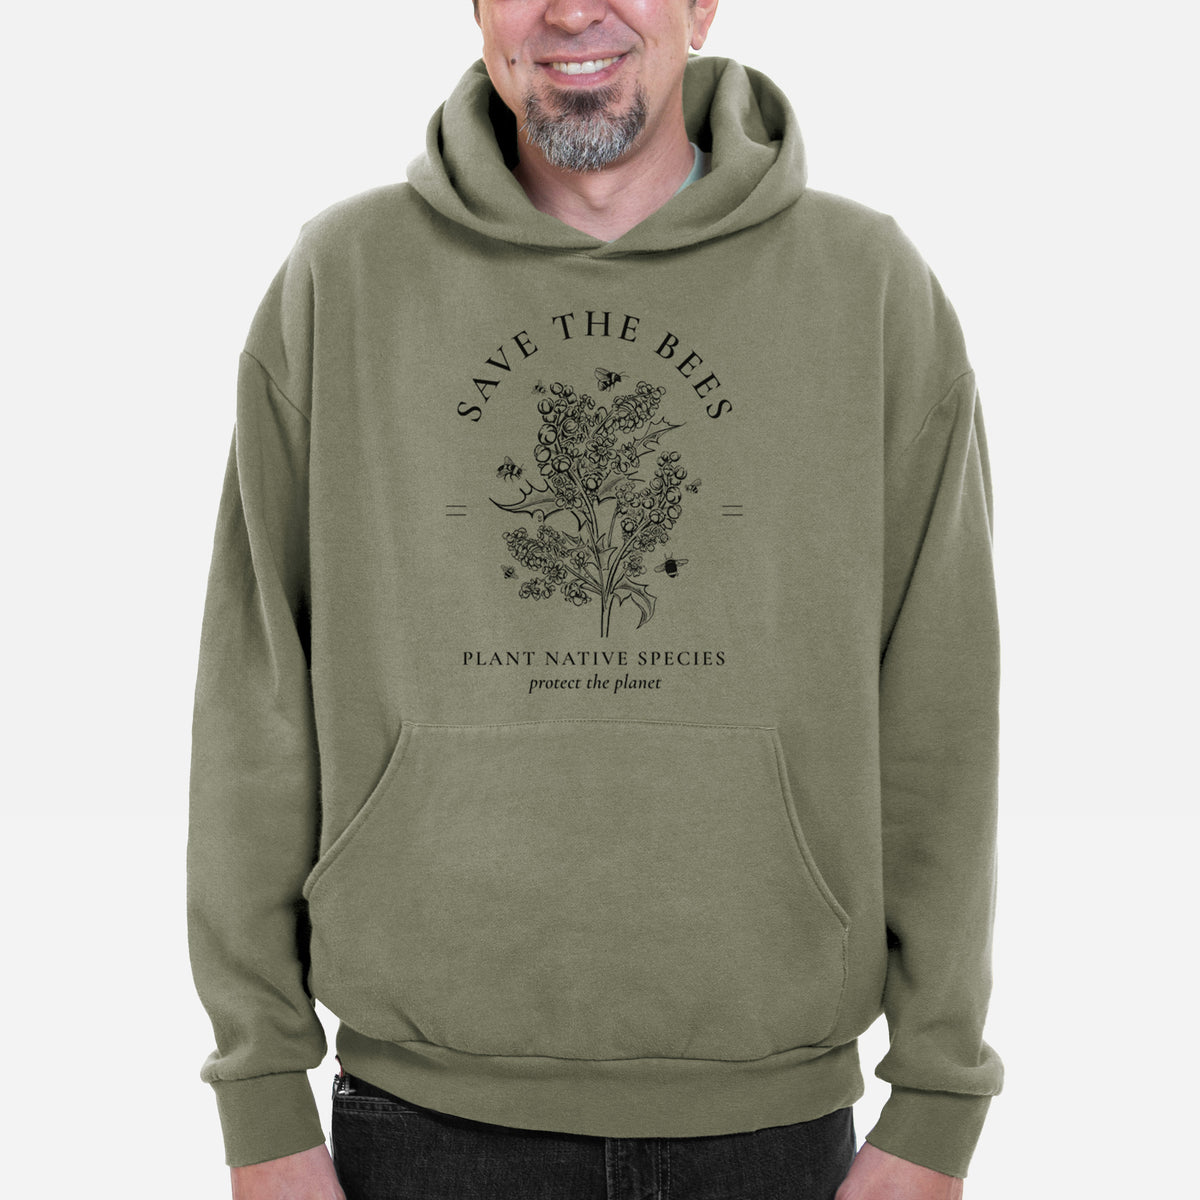 Save the Bees - Plant Native Species  - Bodega Midweight Hoodie